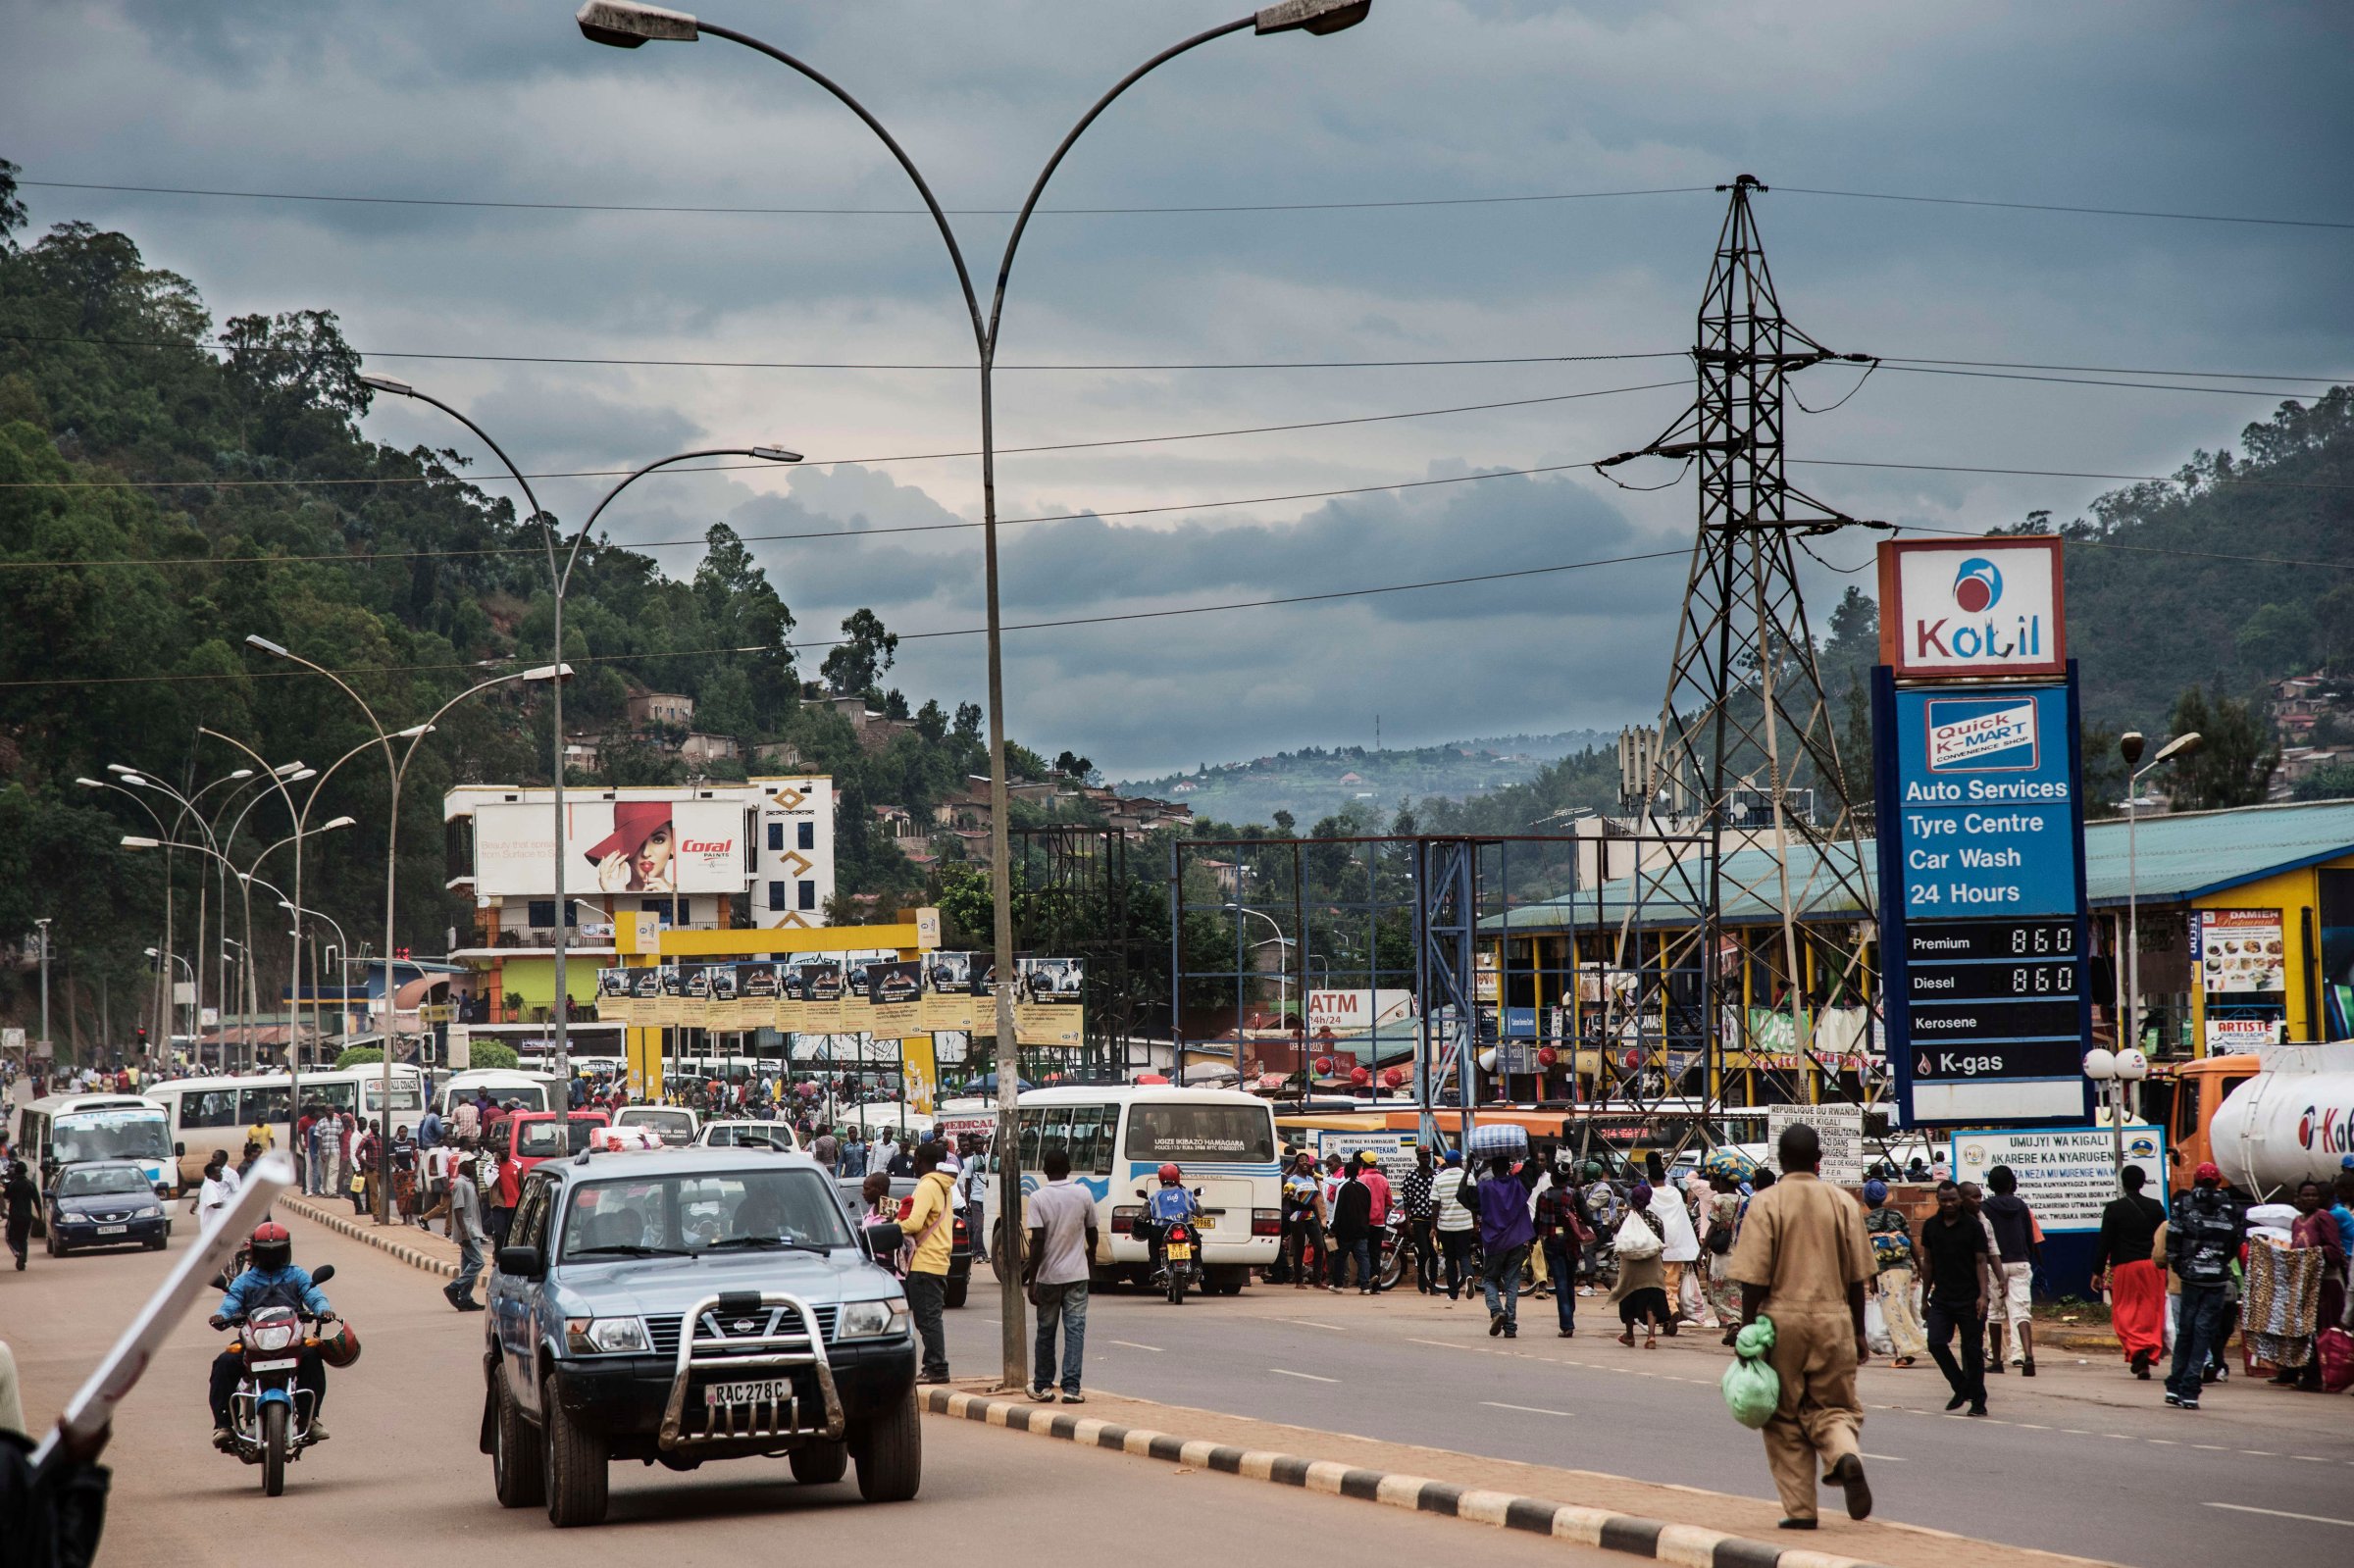 A busy Kigali popular district. Kigali, with a population of